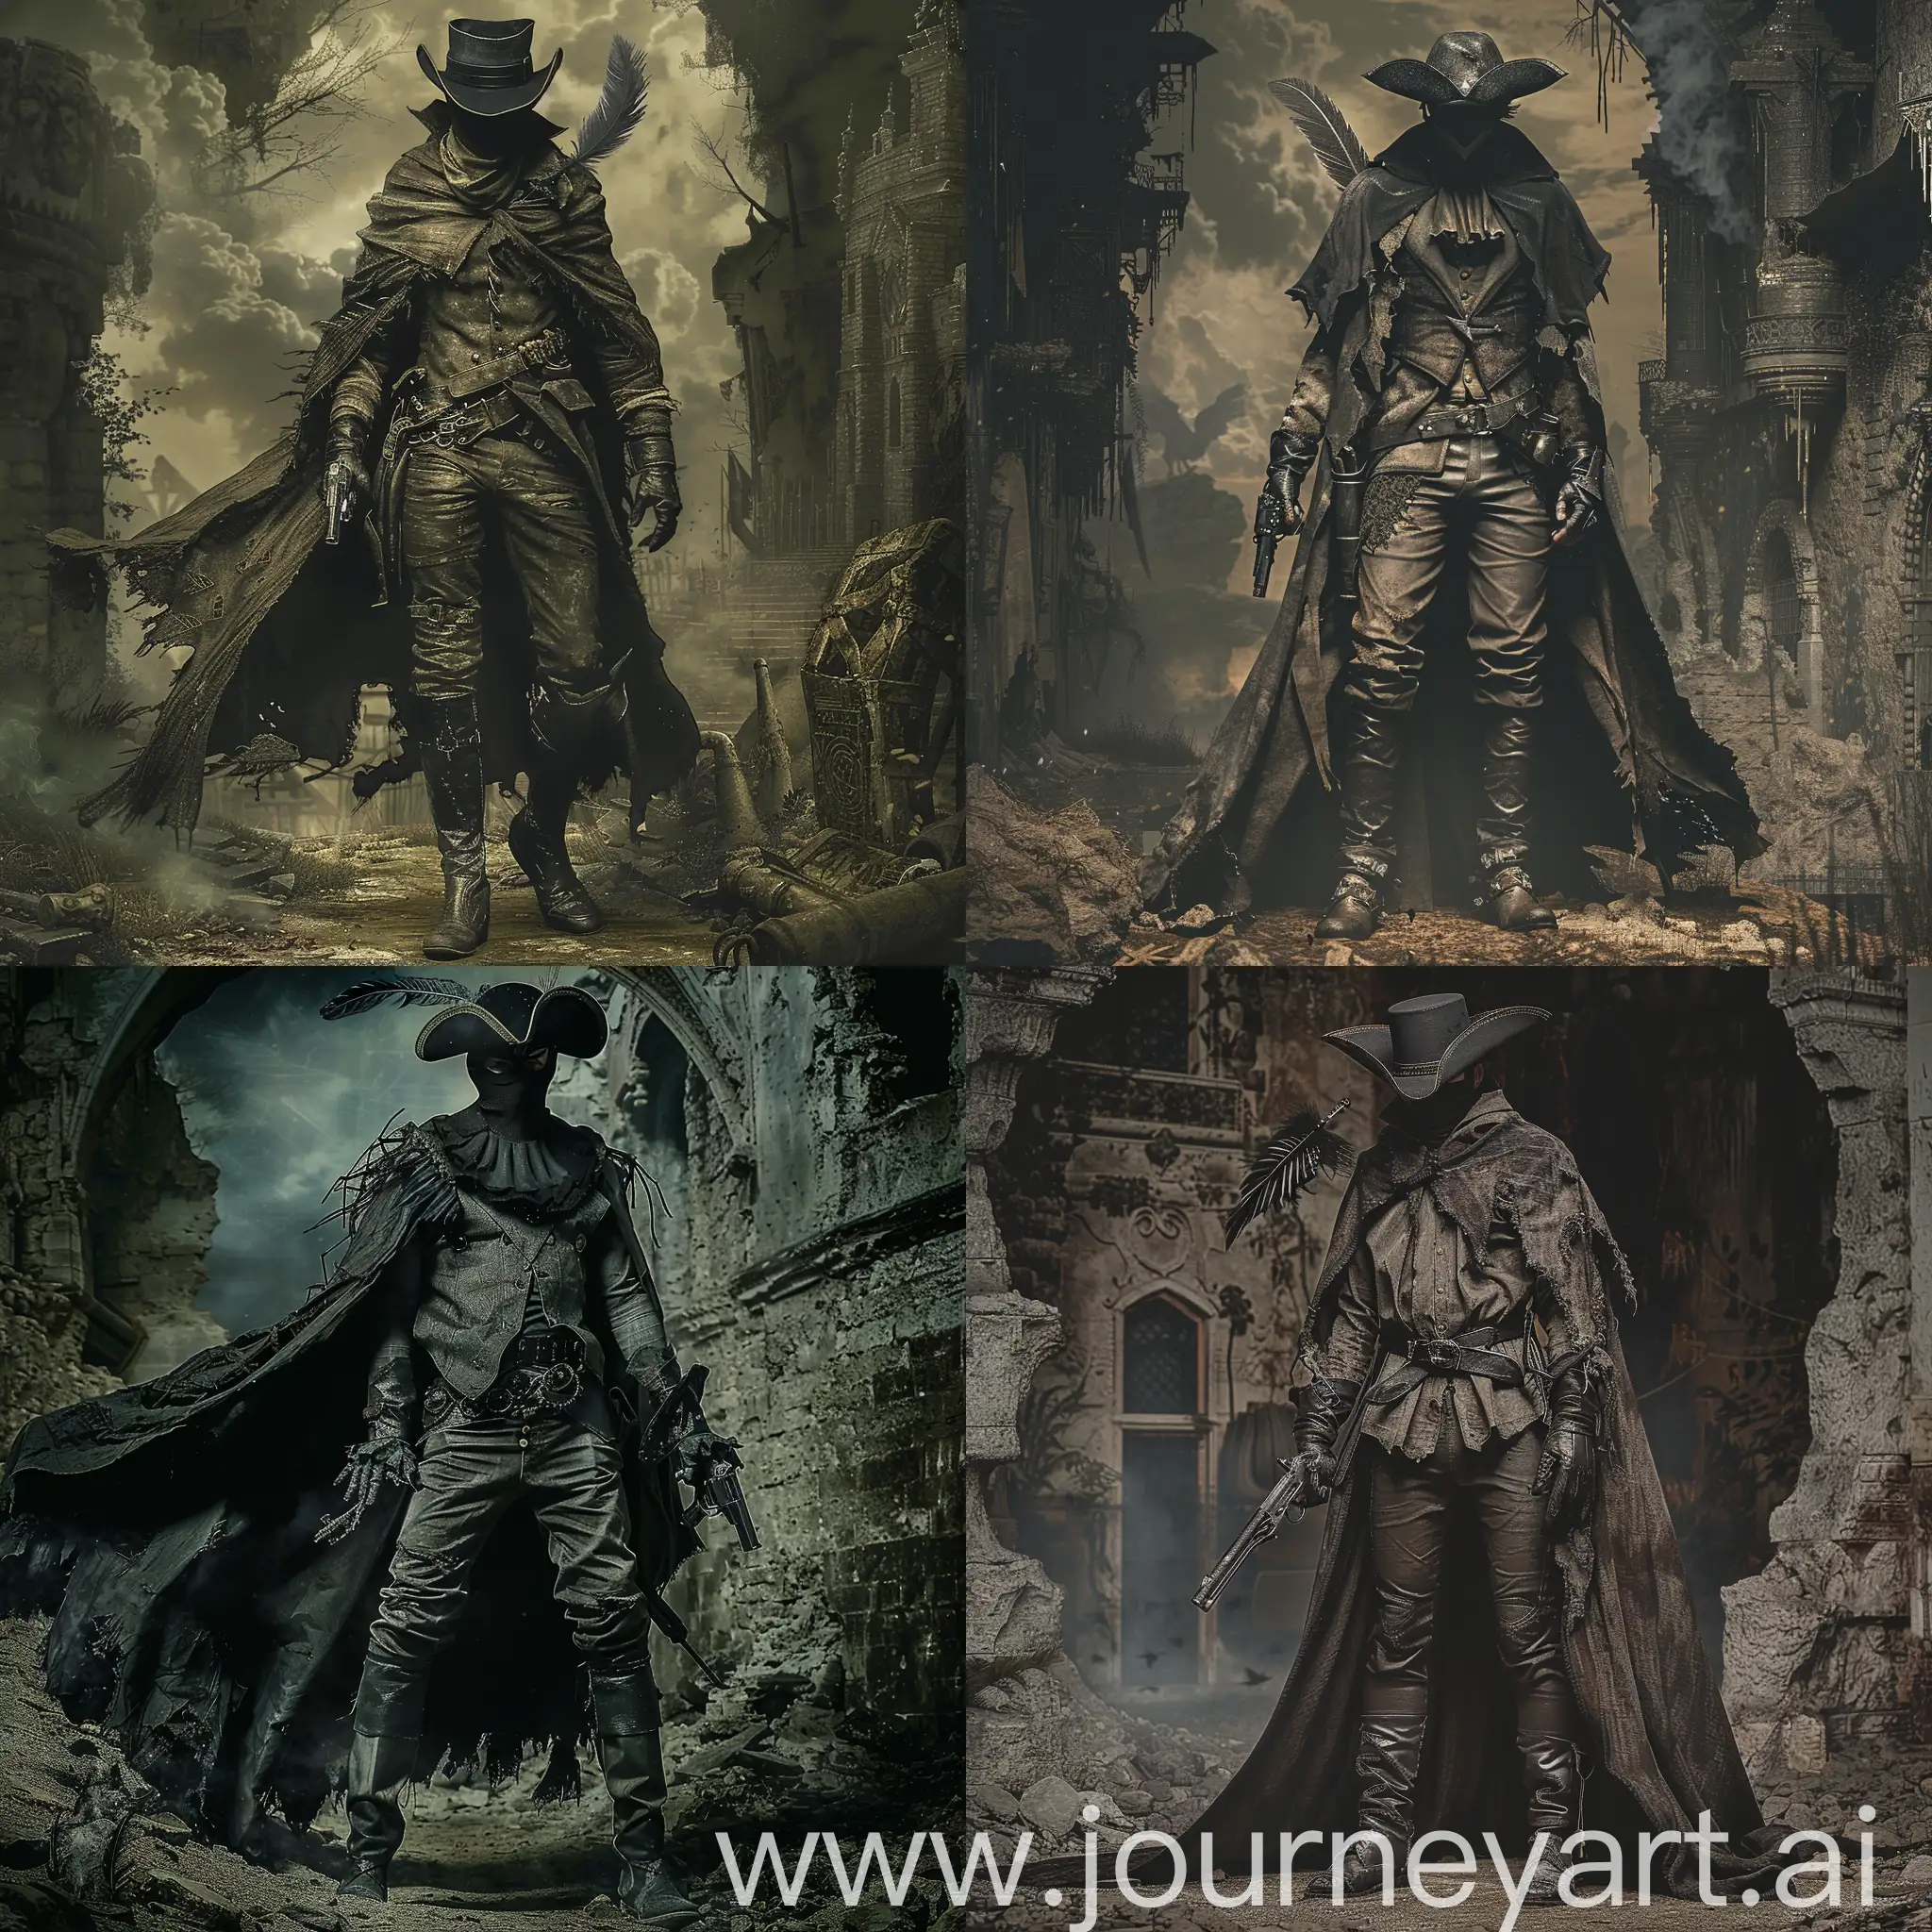 A man in edgy attire inspired by Bloodborne wears a tattered, dark cloak over a high-collared shirt, paired with leather gloves and trousers. Knee-high boots and dark accessories complete the look, evoking the gothic, Victorian aesthetic with a hint of horror, wielding a gunblade, wears a black mask and a tricorne with a feather in a dark rotting castle ,1970's dark fantasy book cover style, gritty, dark, vintage, detailed